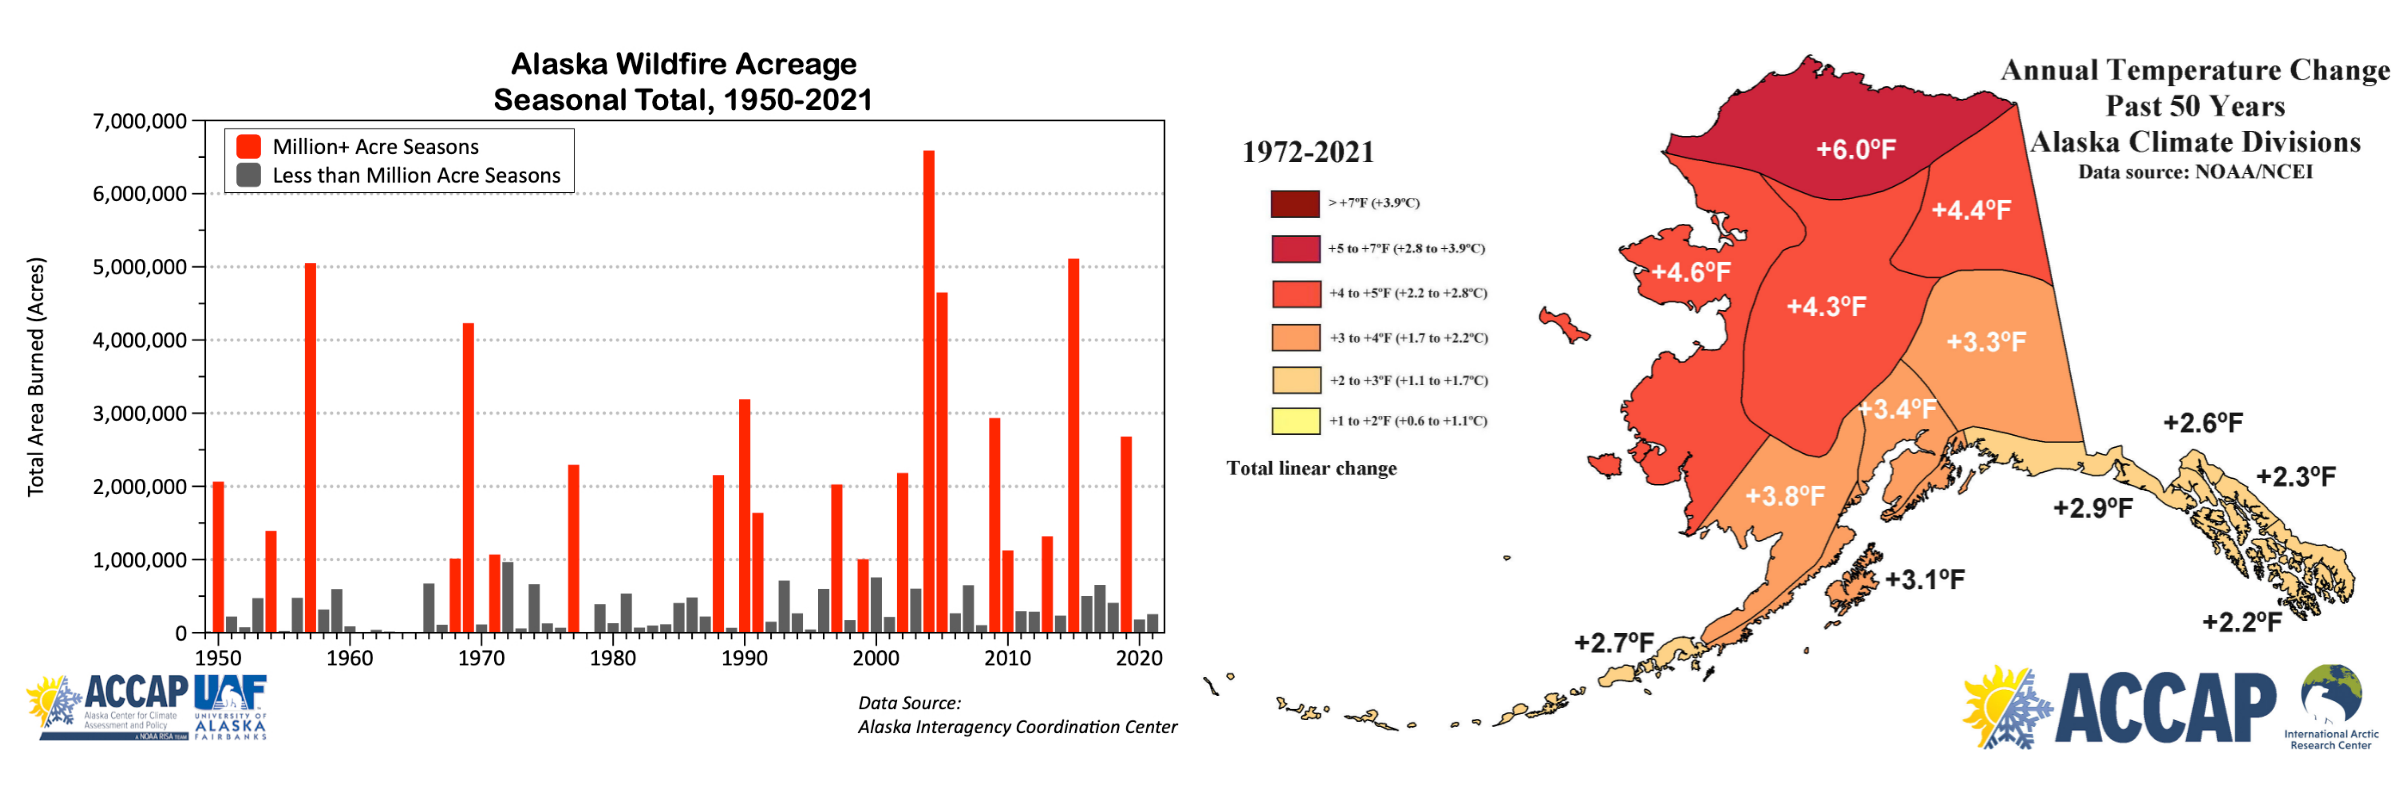 Graphs showing the increase in annual temperature and acreage burned from 1950-2021